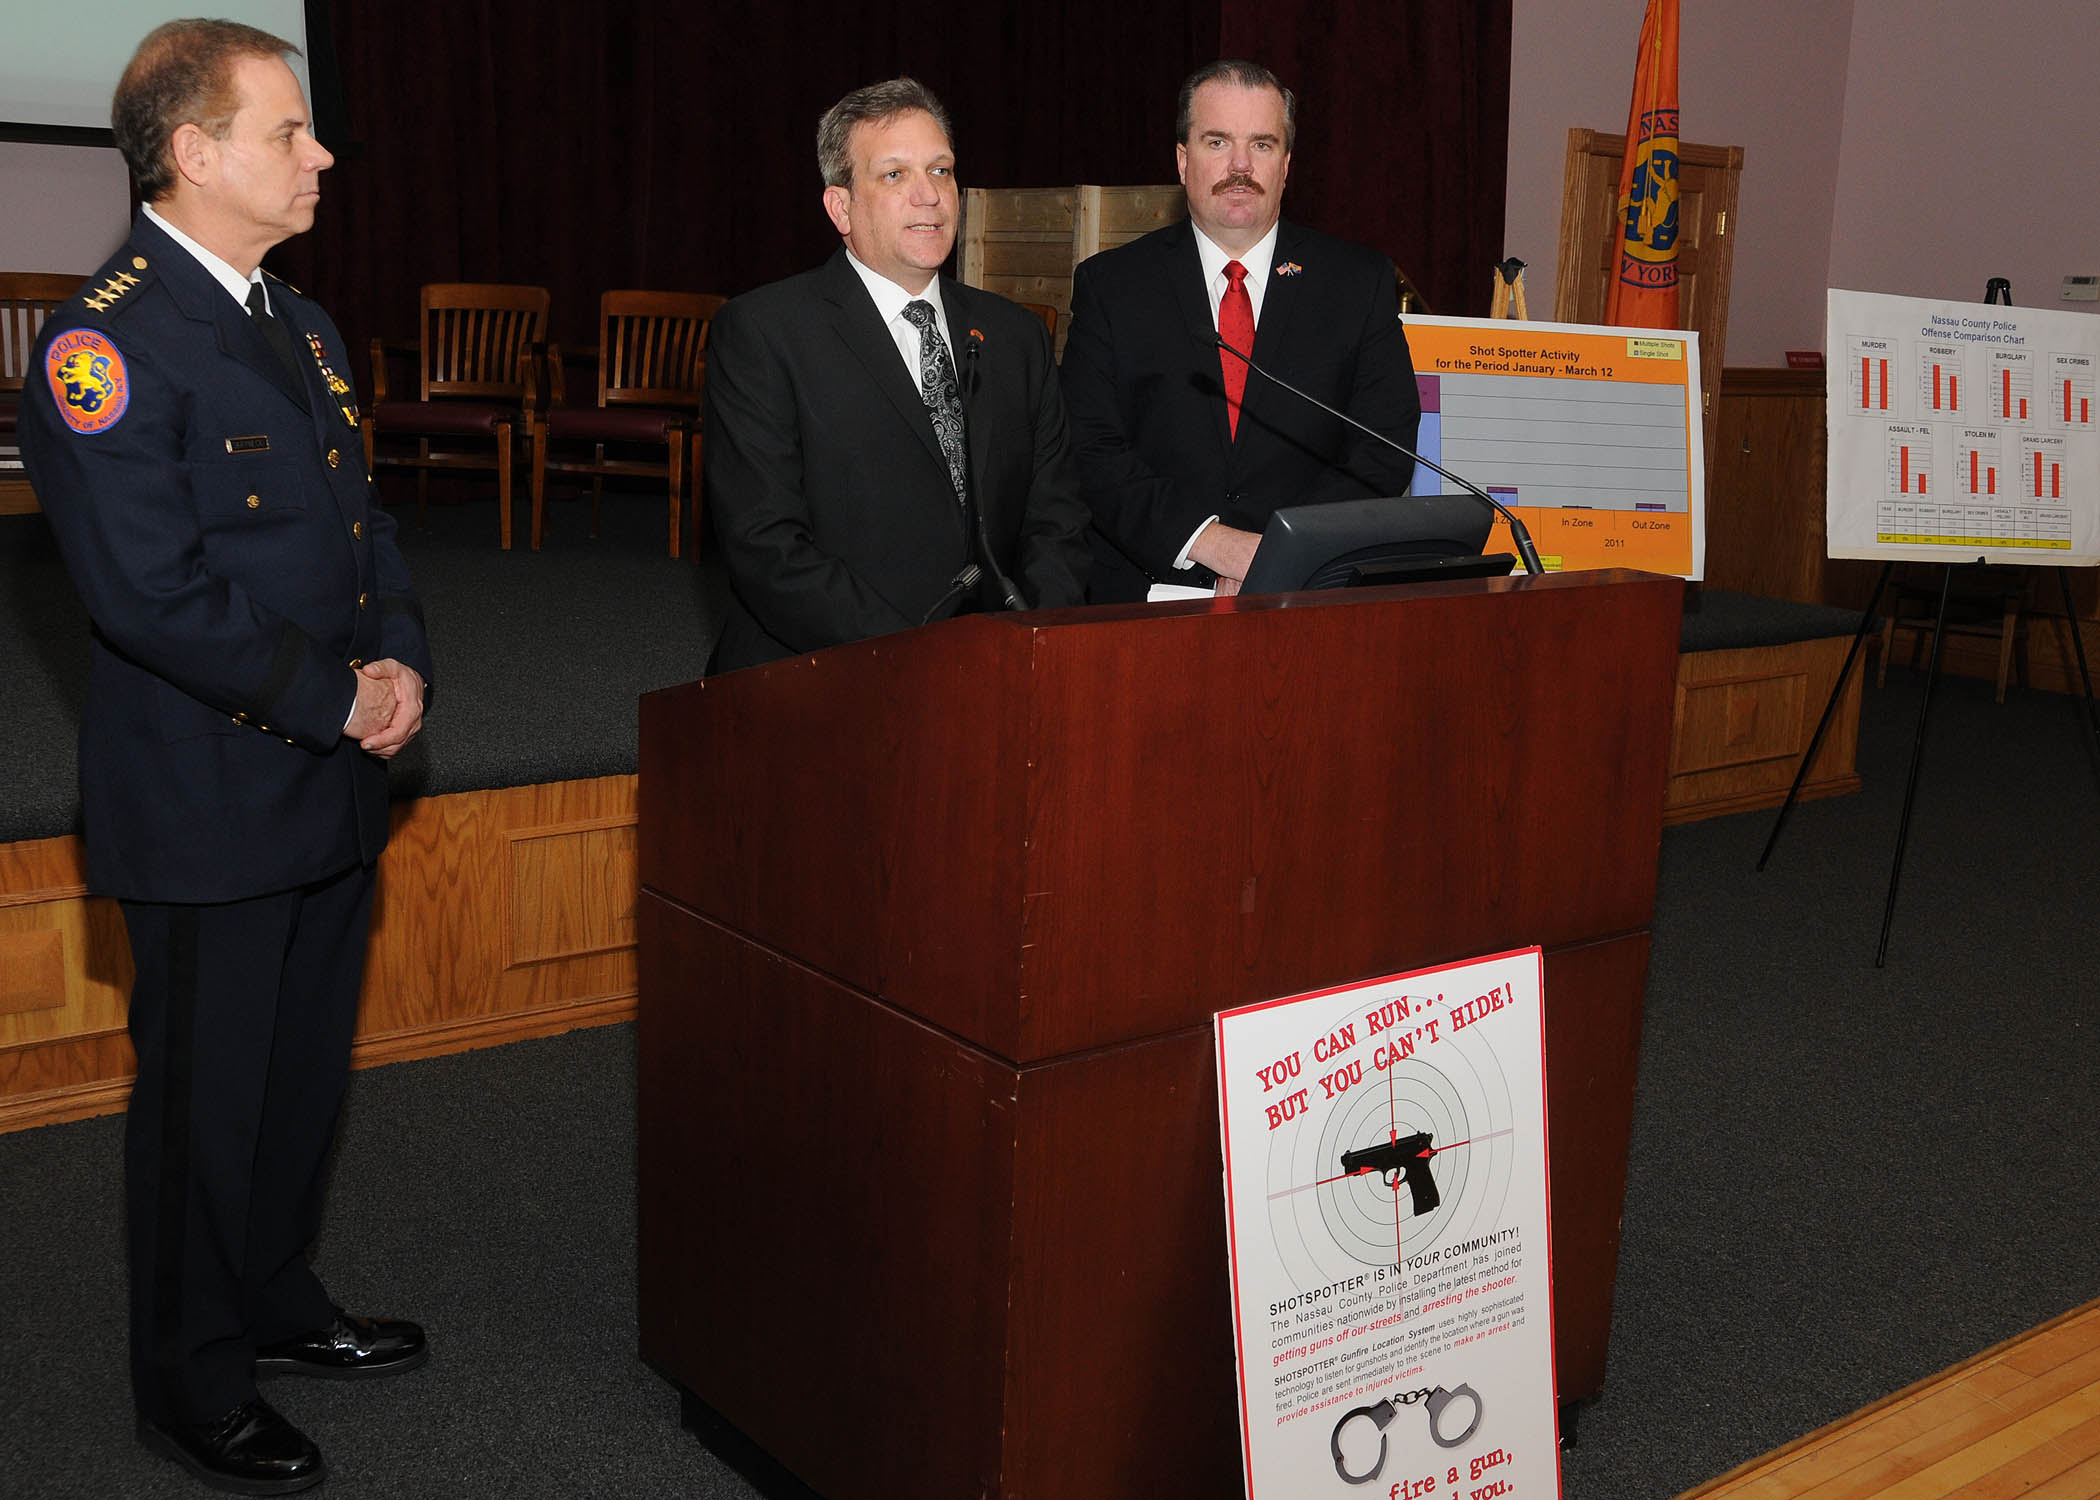 Mangano announces decreases in shots fired in shotspotter zones